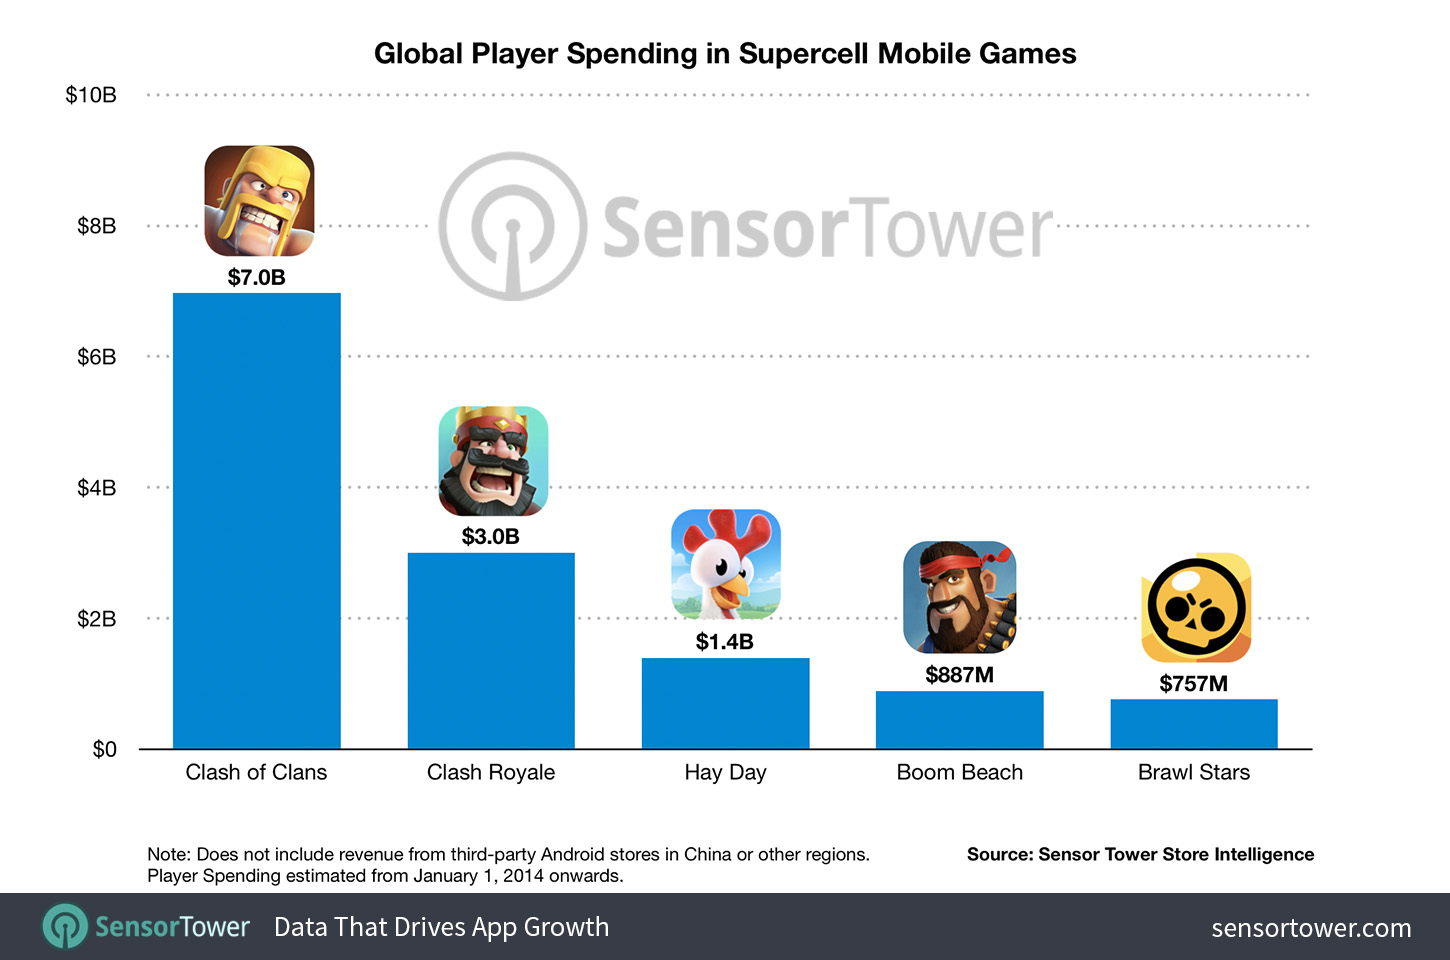 “Global Player Spending in Supercell Mobile Games”